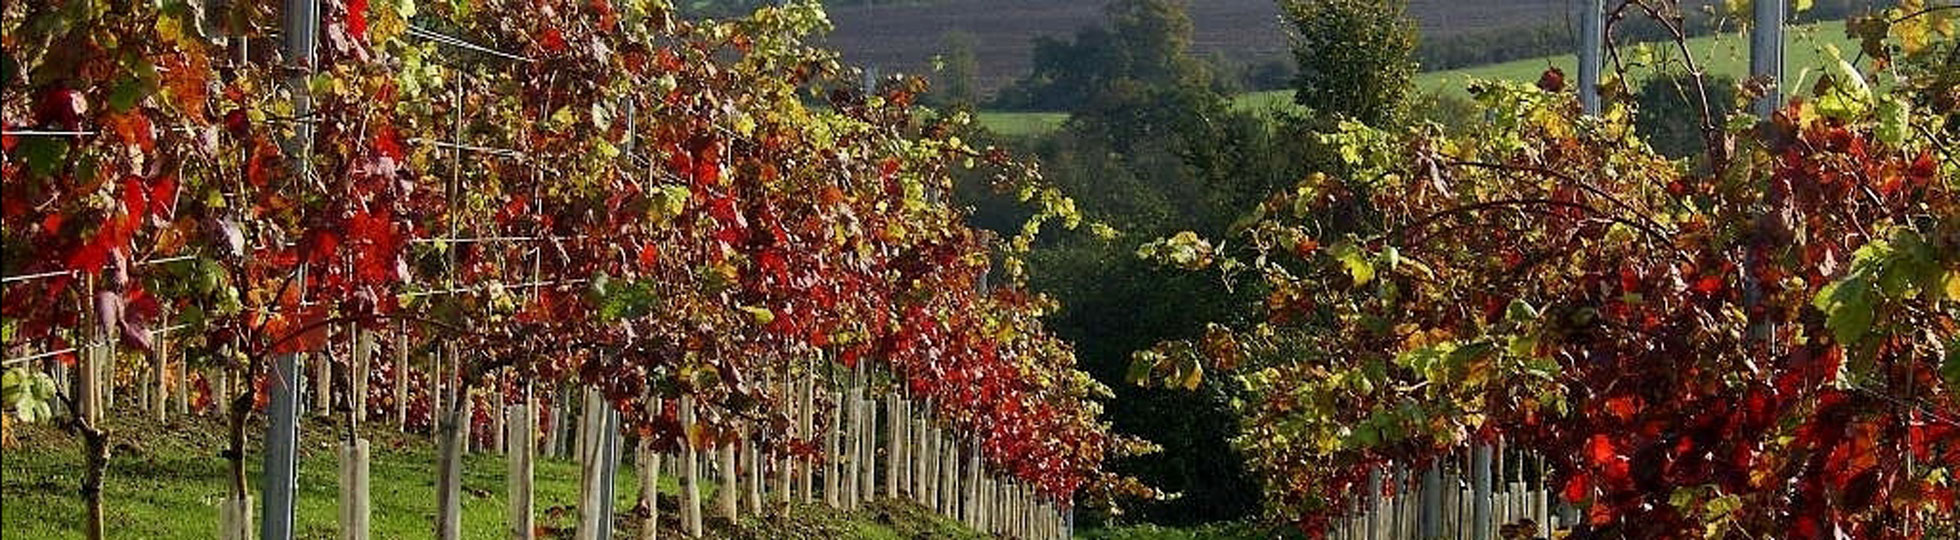 Young vines producing Pinot Noir at Martin’s Lane, Crouch Valley, Essex